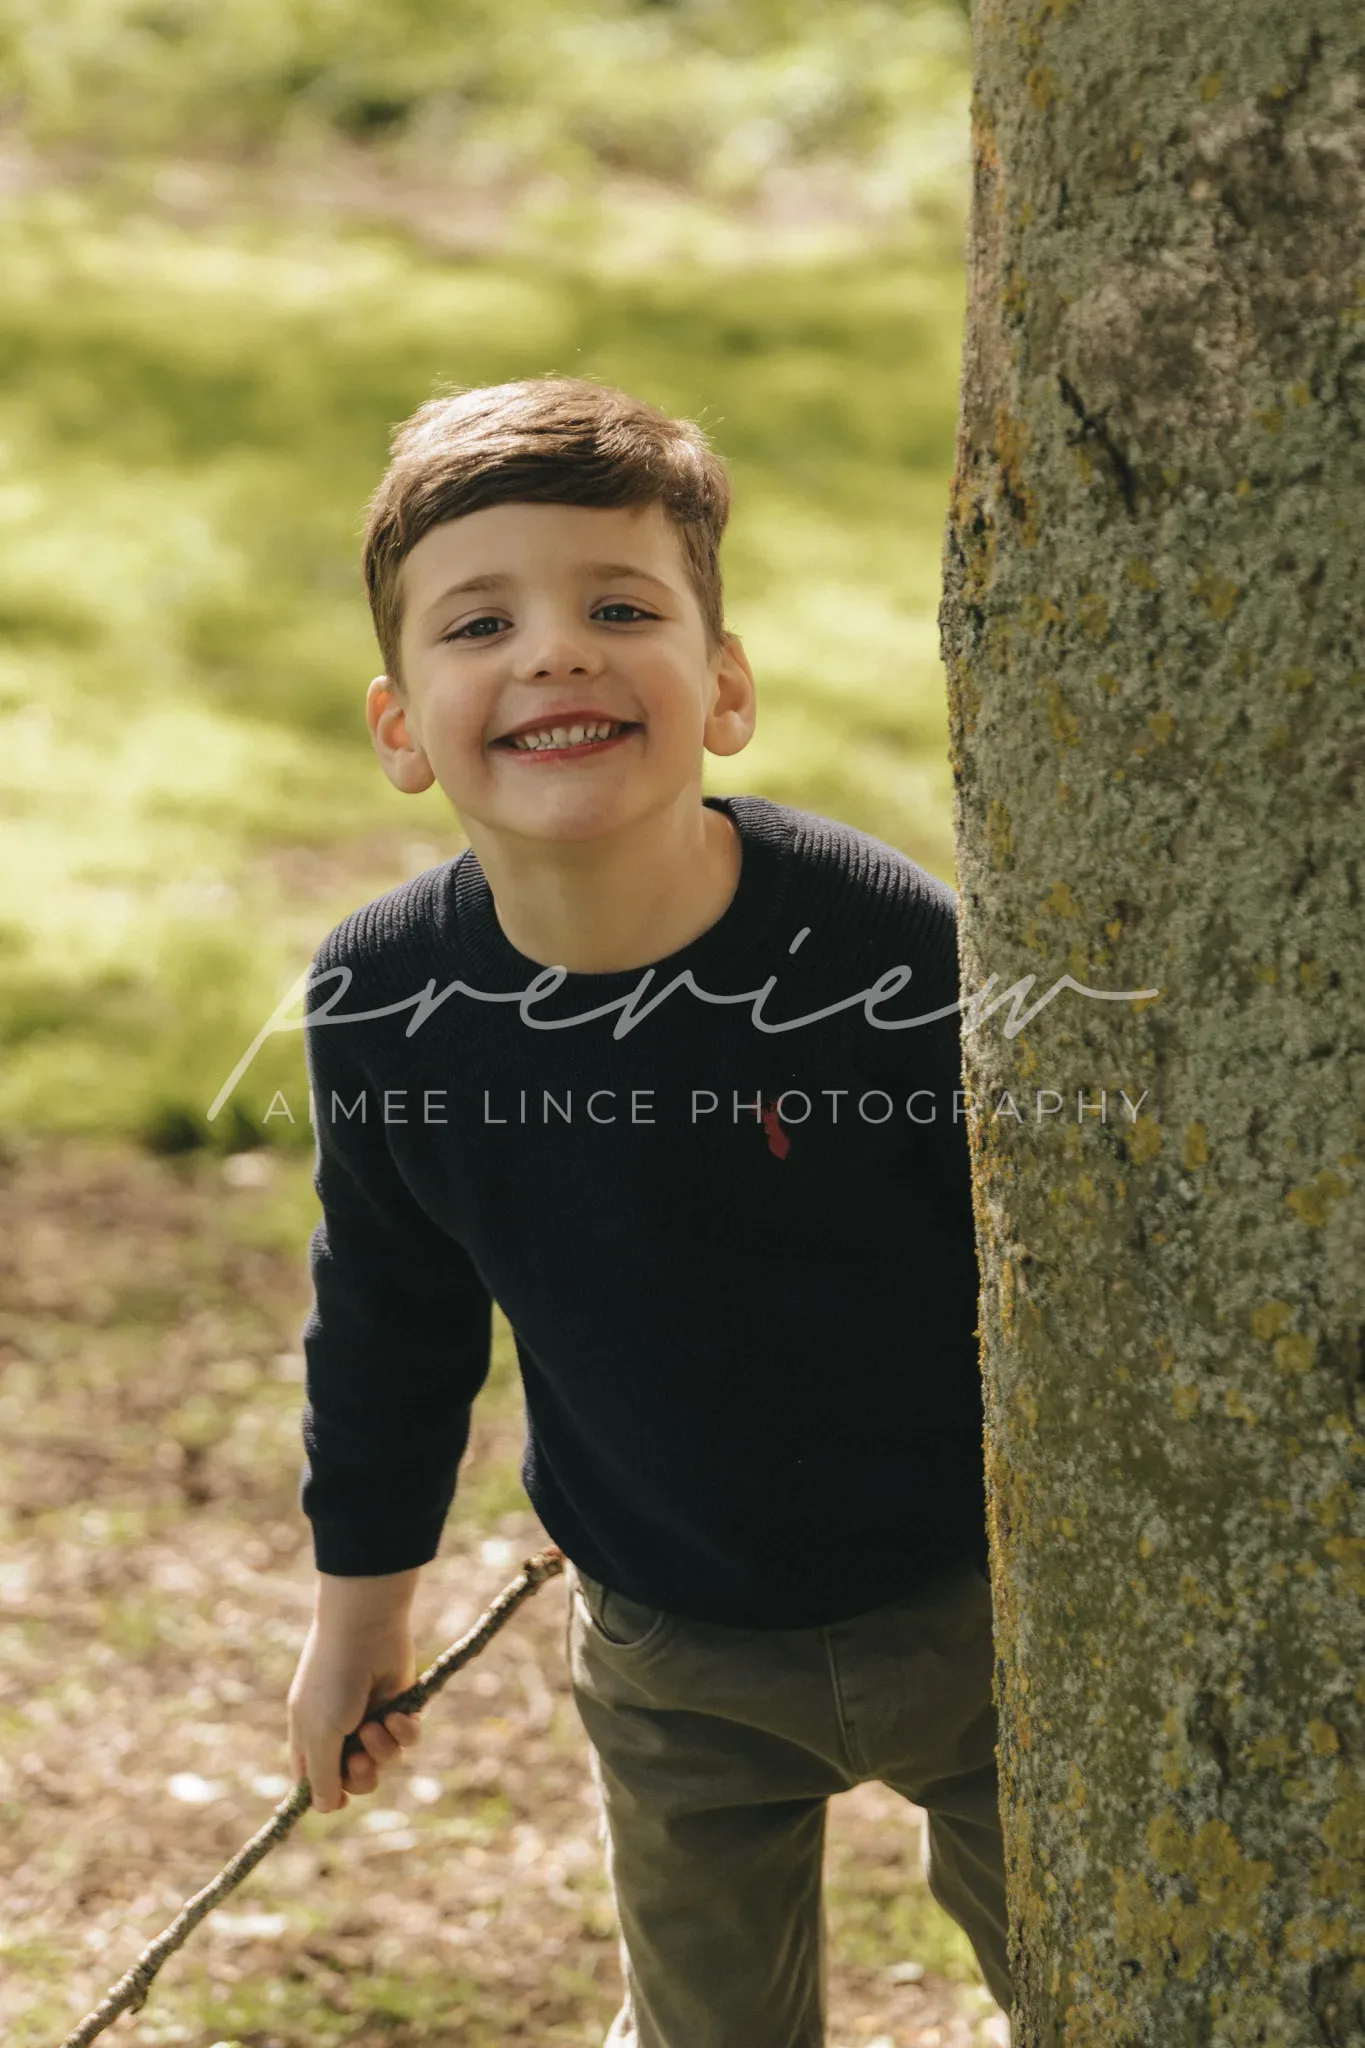 A young boy with short brown hair and a playful smile peeks out from behind a tree. he holds a stick and wears a dark sweater and olive pants. the background is a softly blurred green landscape. the image has a watermark "premien aimee lance photography.